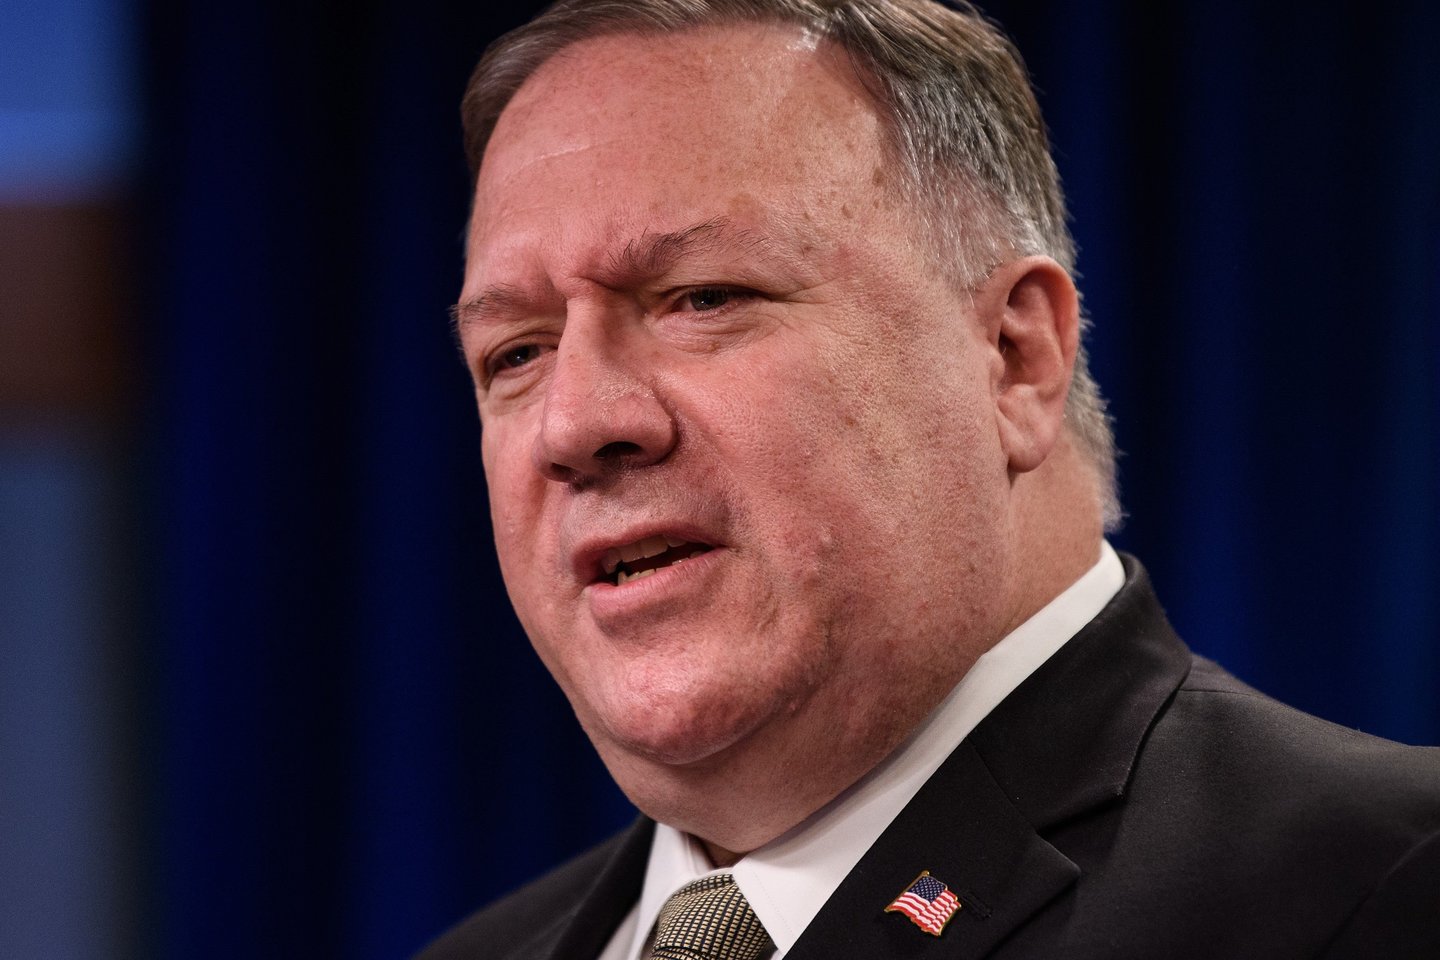  Mike'as Pompeo.<br>AFP/Scanpix nuotr.